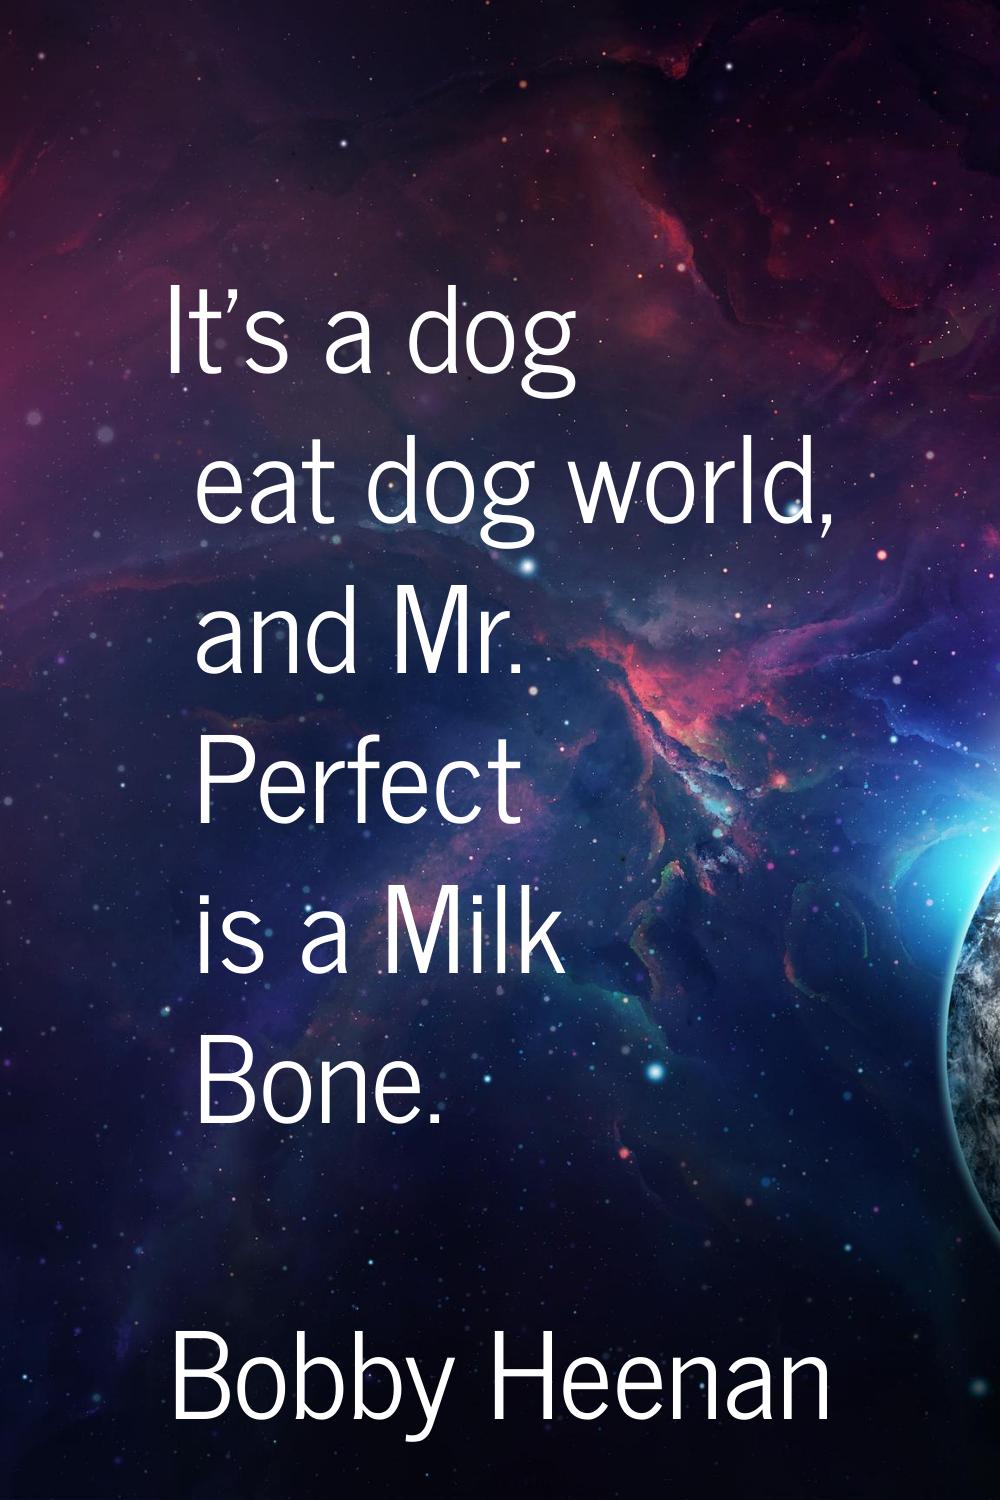 It's a dog eat dog world, and Mr. Perfect is a Milk Bone.